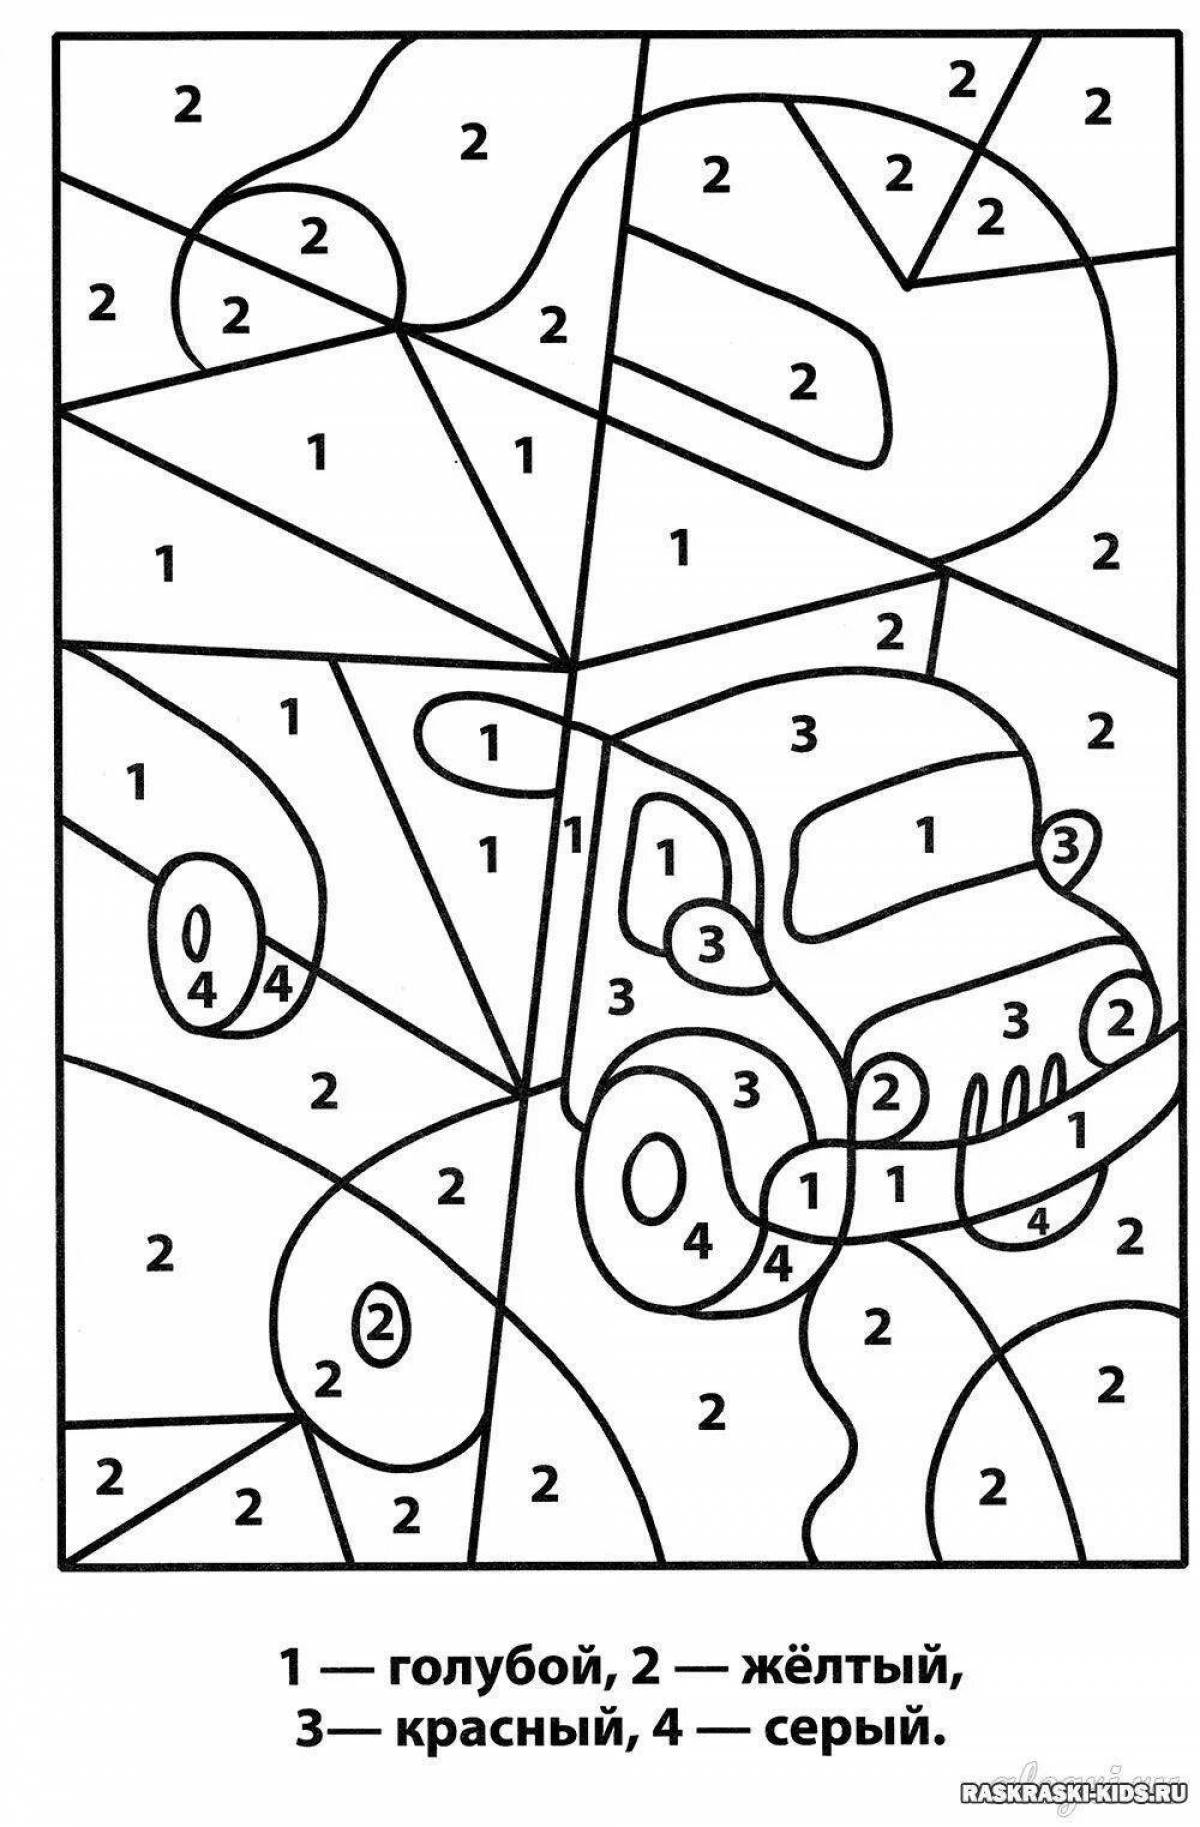 Fun coloring for grade 2 by numbers